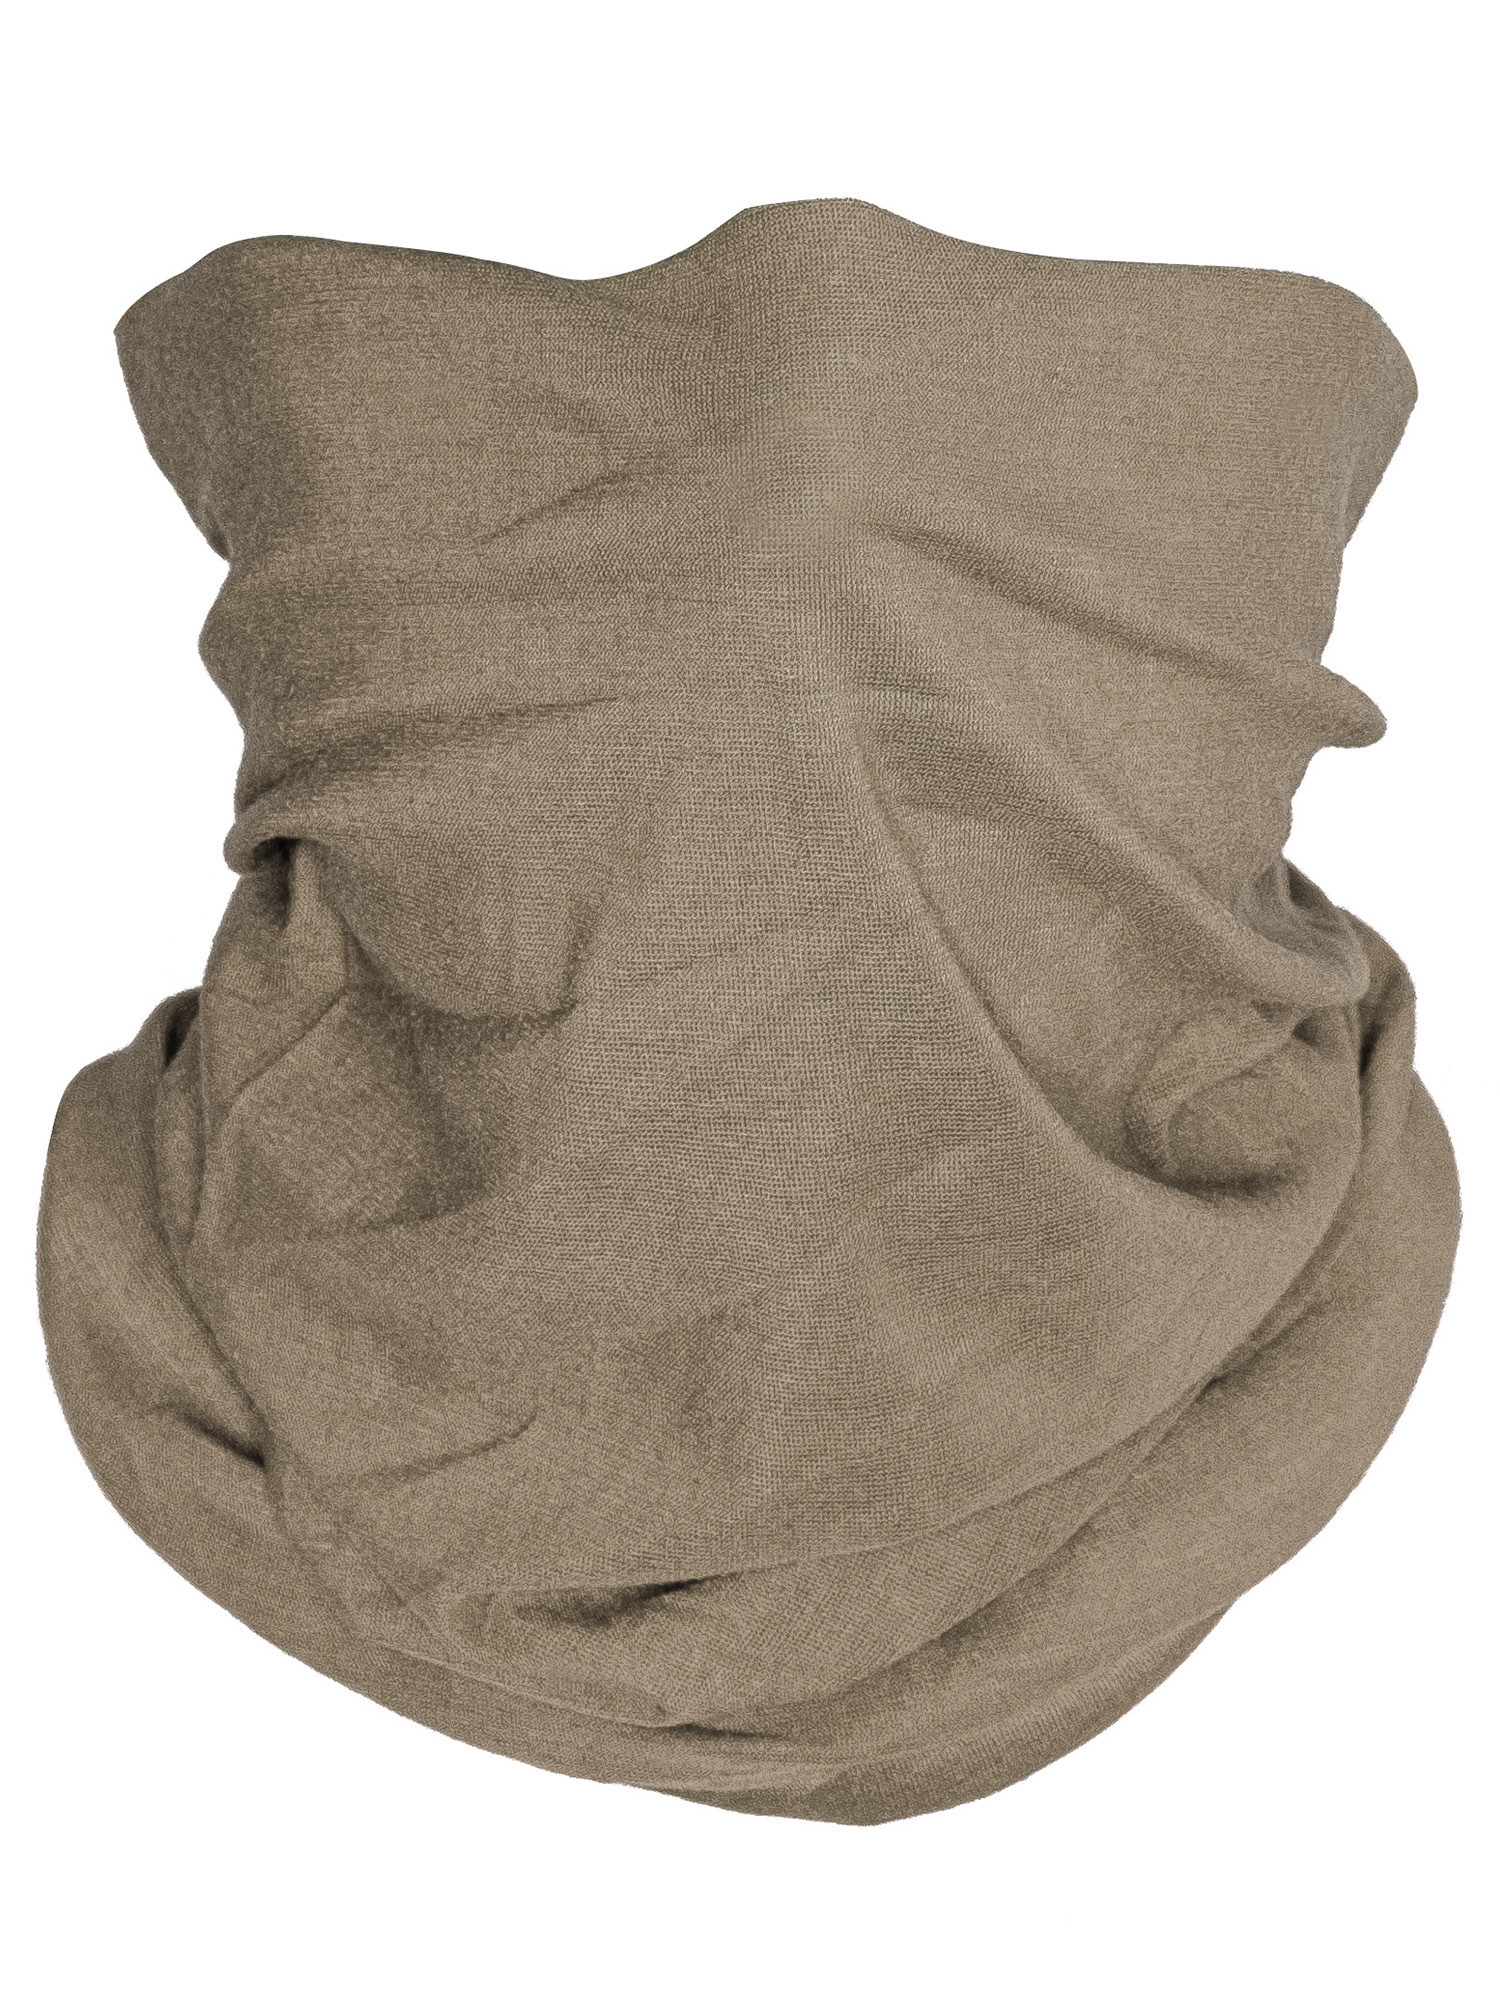 Top Headwear Multifunctional Face Covering Neck Gaiter Scarf - Khaki - image 1 of 2